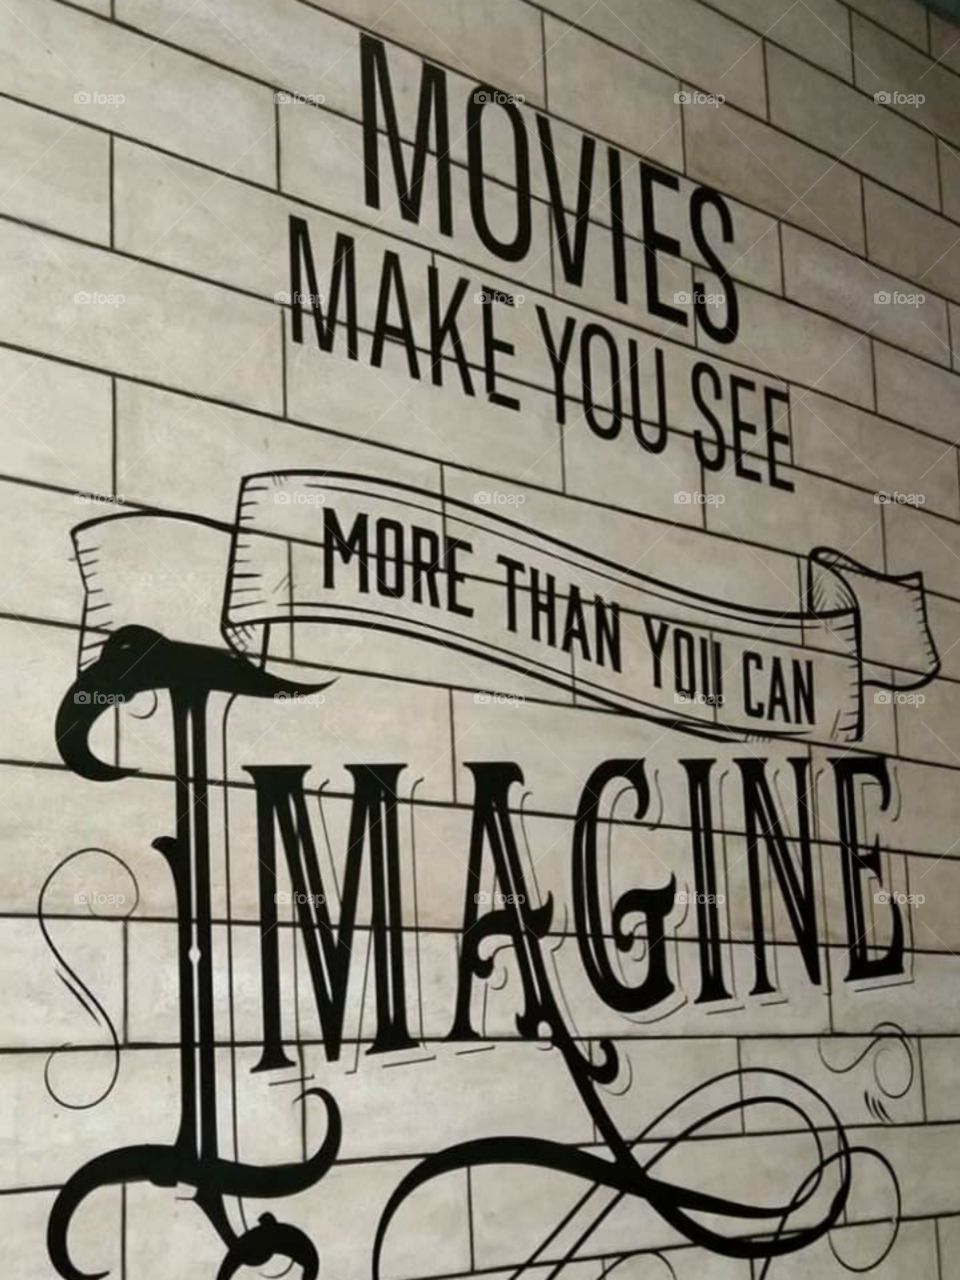 Movies make you see more than you can imagine. 😊